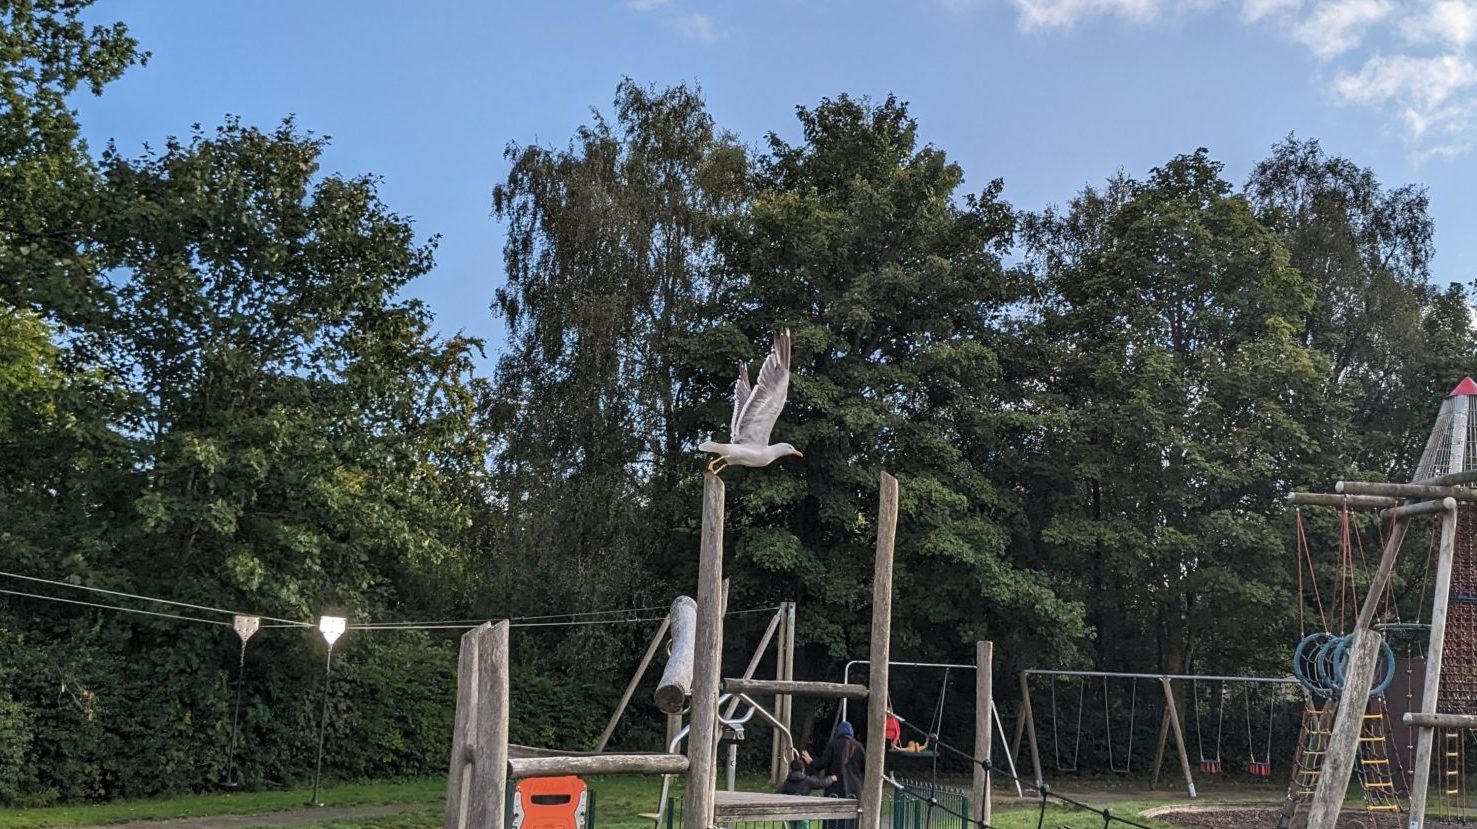 A seagull taking flight from atop a climbing frame in Hermitage Park, Helensburgh